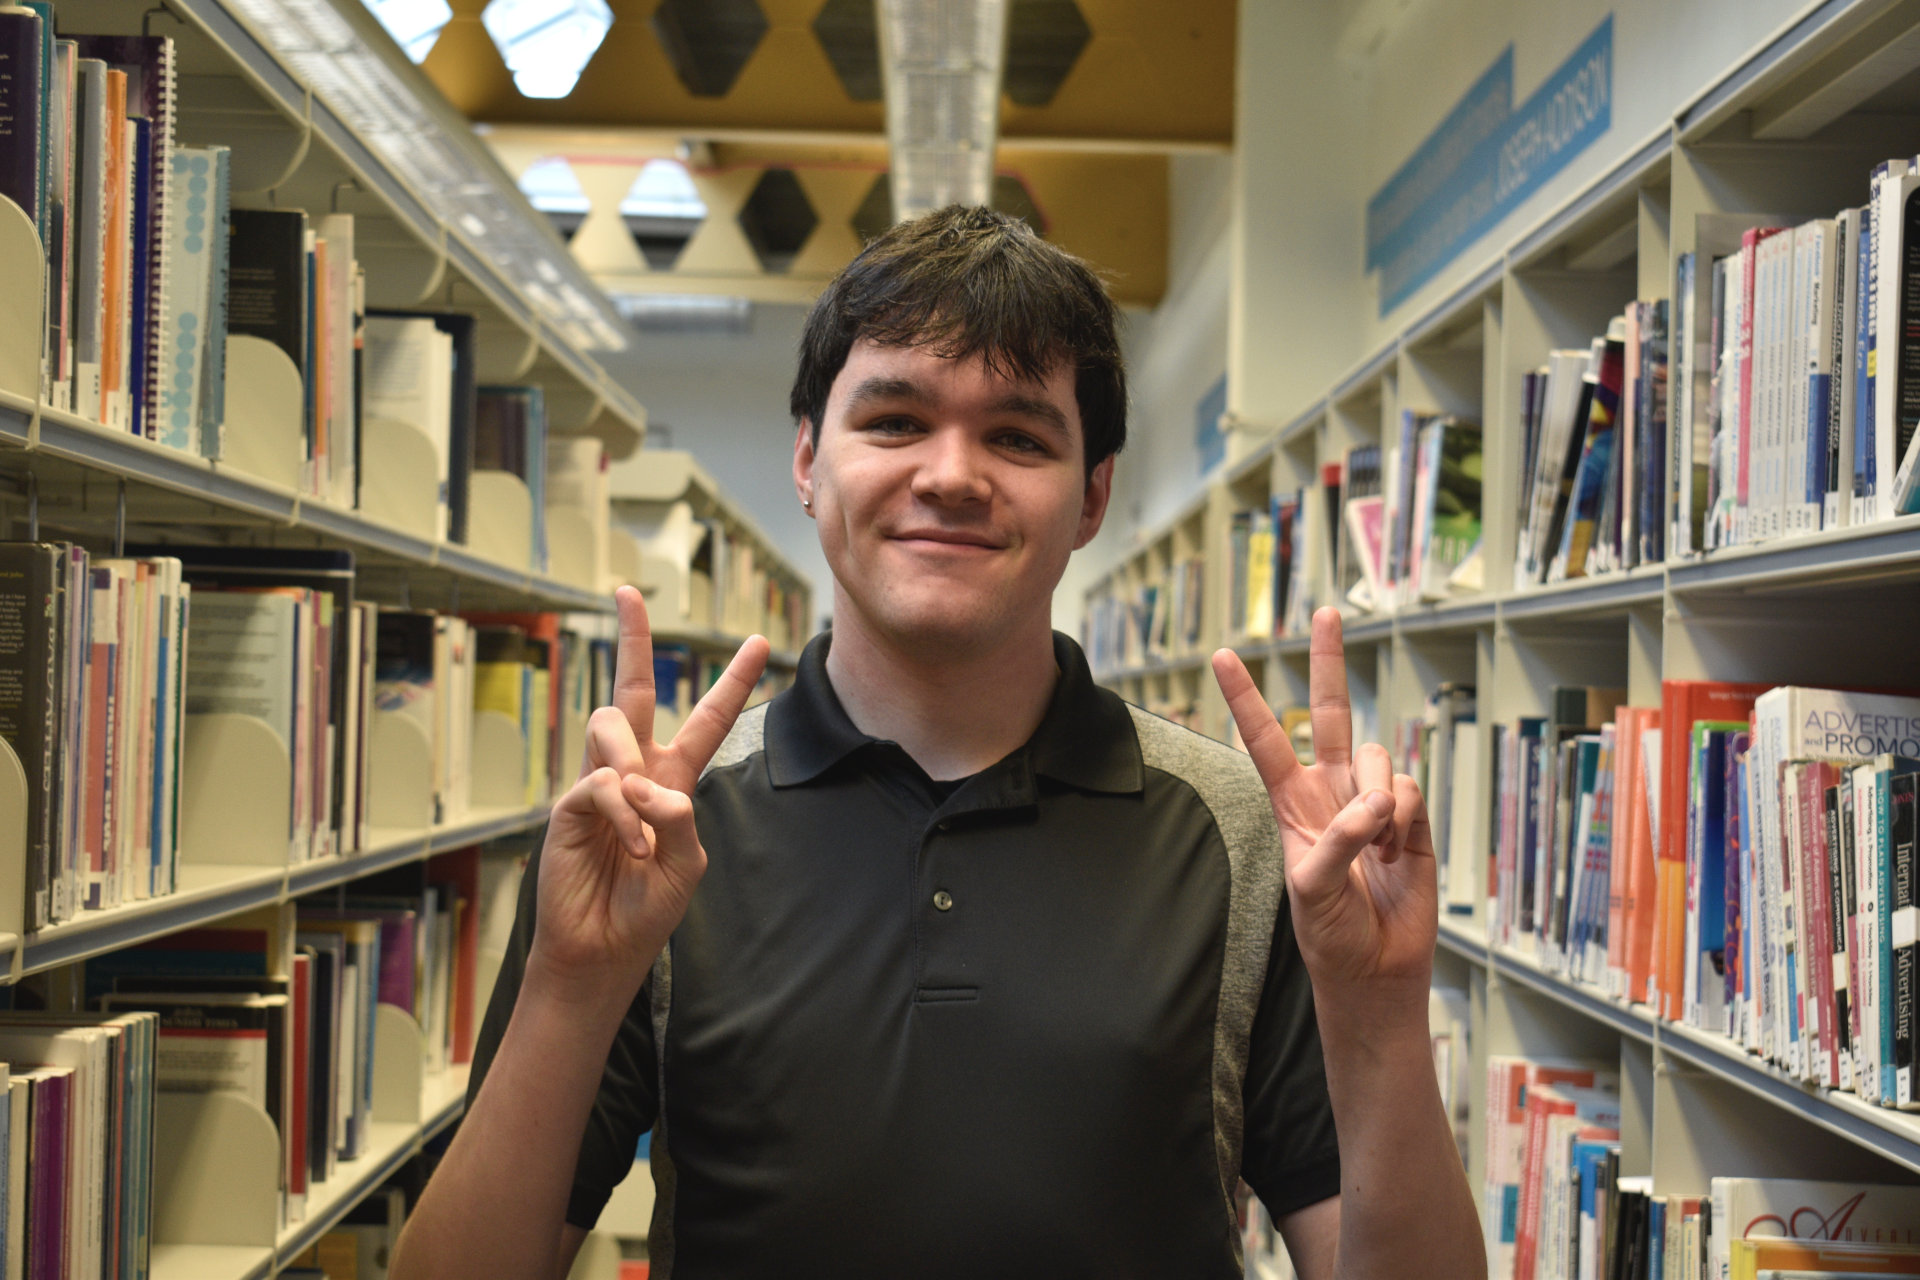 Luke Ford-Busson giving peace sign with both hands in ARU Cambridge library